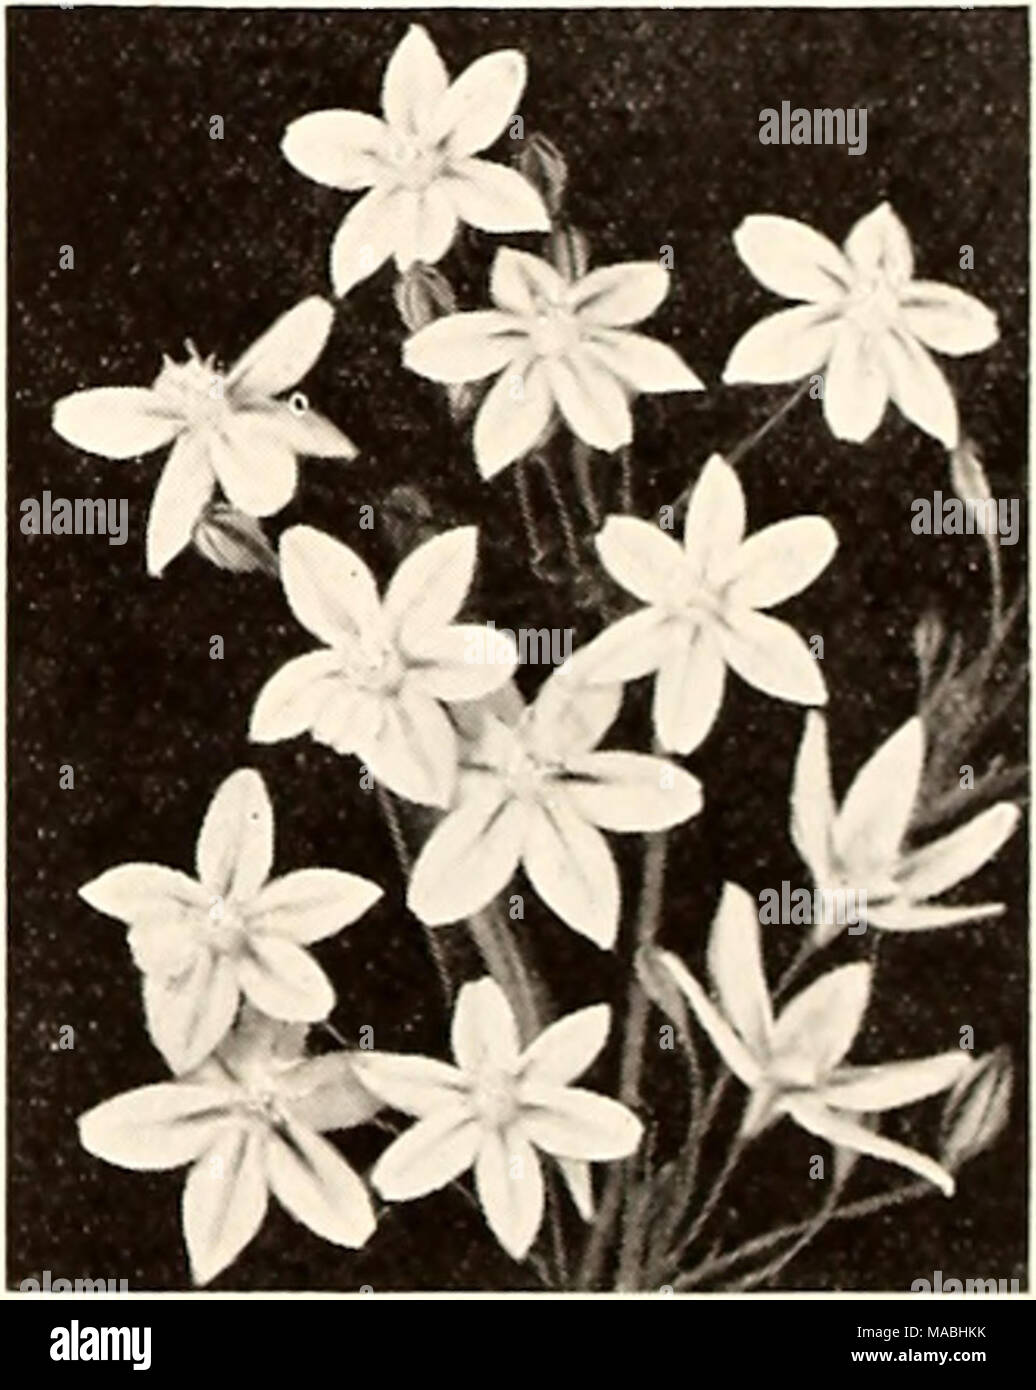 . Dreer's wholesale price list for florists . Brodiaea—A native of our Far West Brodiaea Mixed. These are lovely little bulbous plants native to our western states. They bloom during the spring and early summer, doing well in a sunny or semi- shaded position or in the gritty crevices of a deep rock garden pocket. They bear their showy blooms on stiff slender stems 8 to 15 Jnches long which makes them valuable for cutting. Some varieties in this mixture have lovely star-shaped blooms whereas others produce long trumpets with the petal tips flaring at the ends. Plant them outdoors early in the f Stock Photo